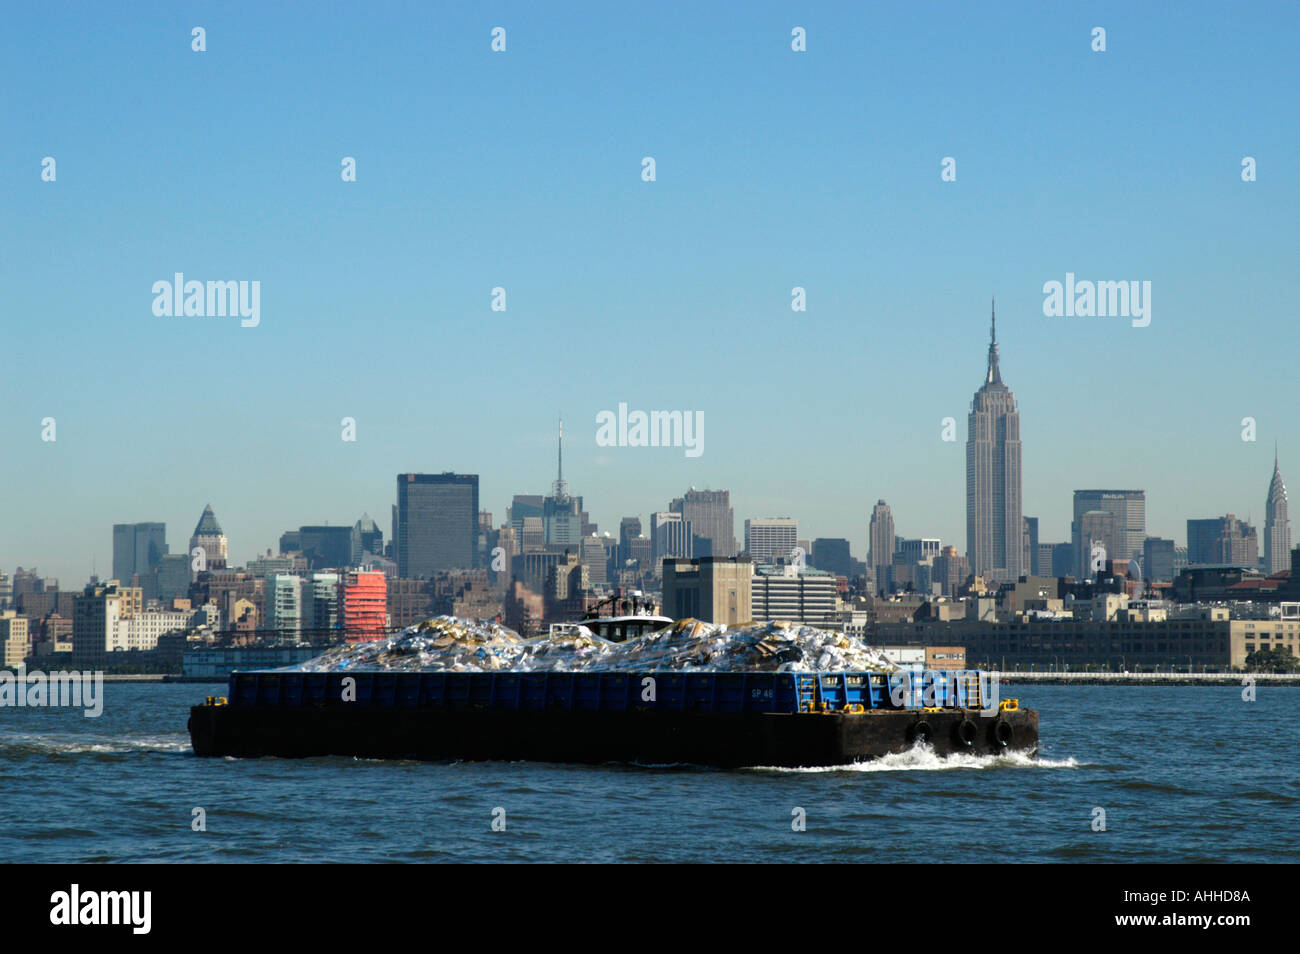 garbage-barge-on-the-hudson-river-new-york-city-usa-AHHD8A.jpg